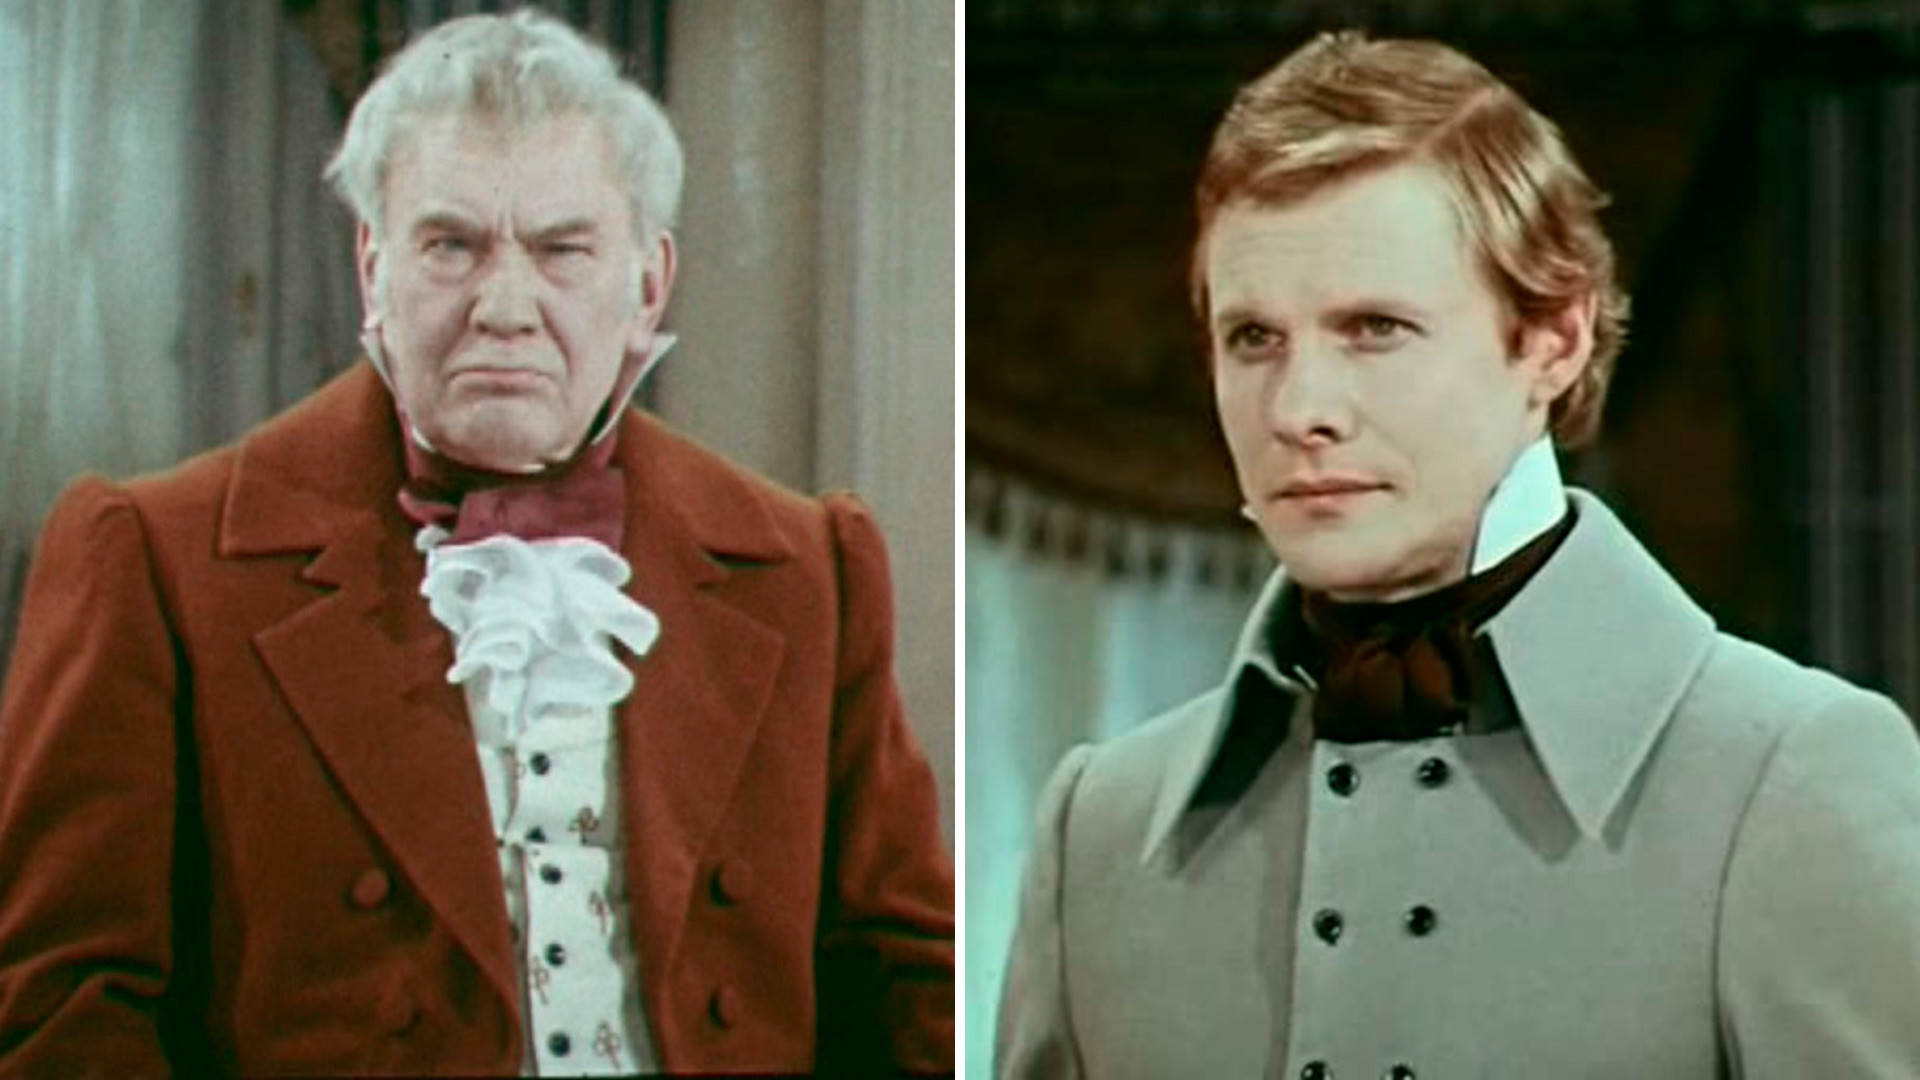 Mikhail Tsarev (L) as Pavel Famusov, Vitaliy Solomin (R) as Alexander Chatsky in a 1977 Soviet teleplay 'Woe from Wit'